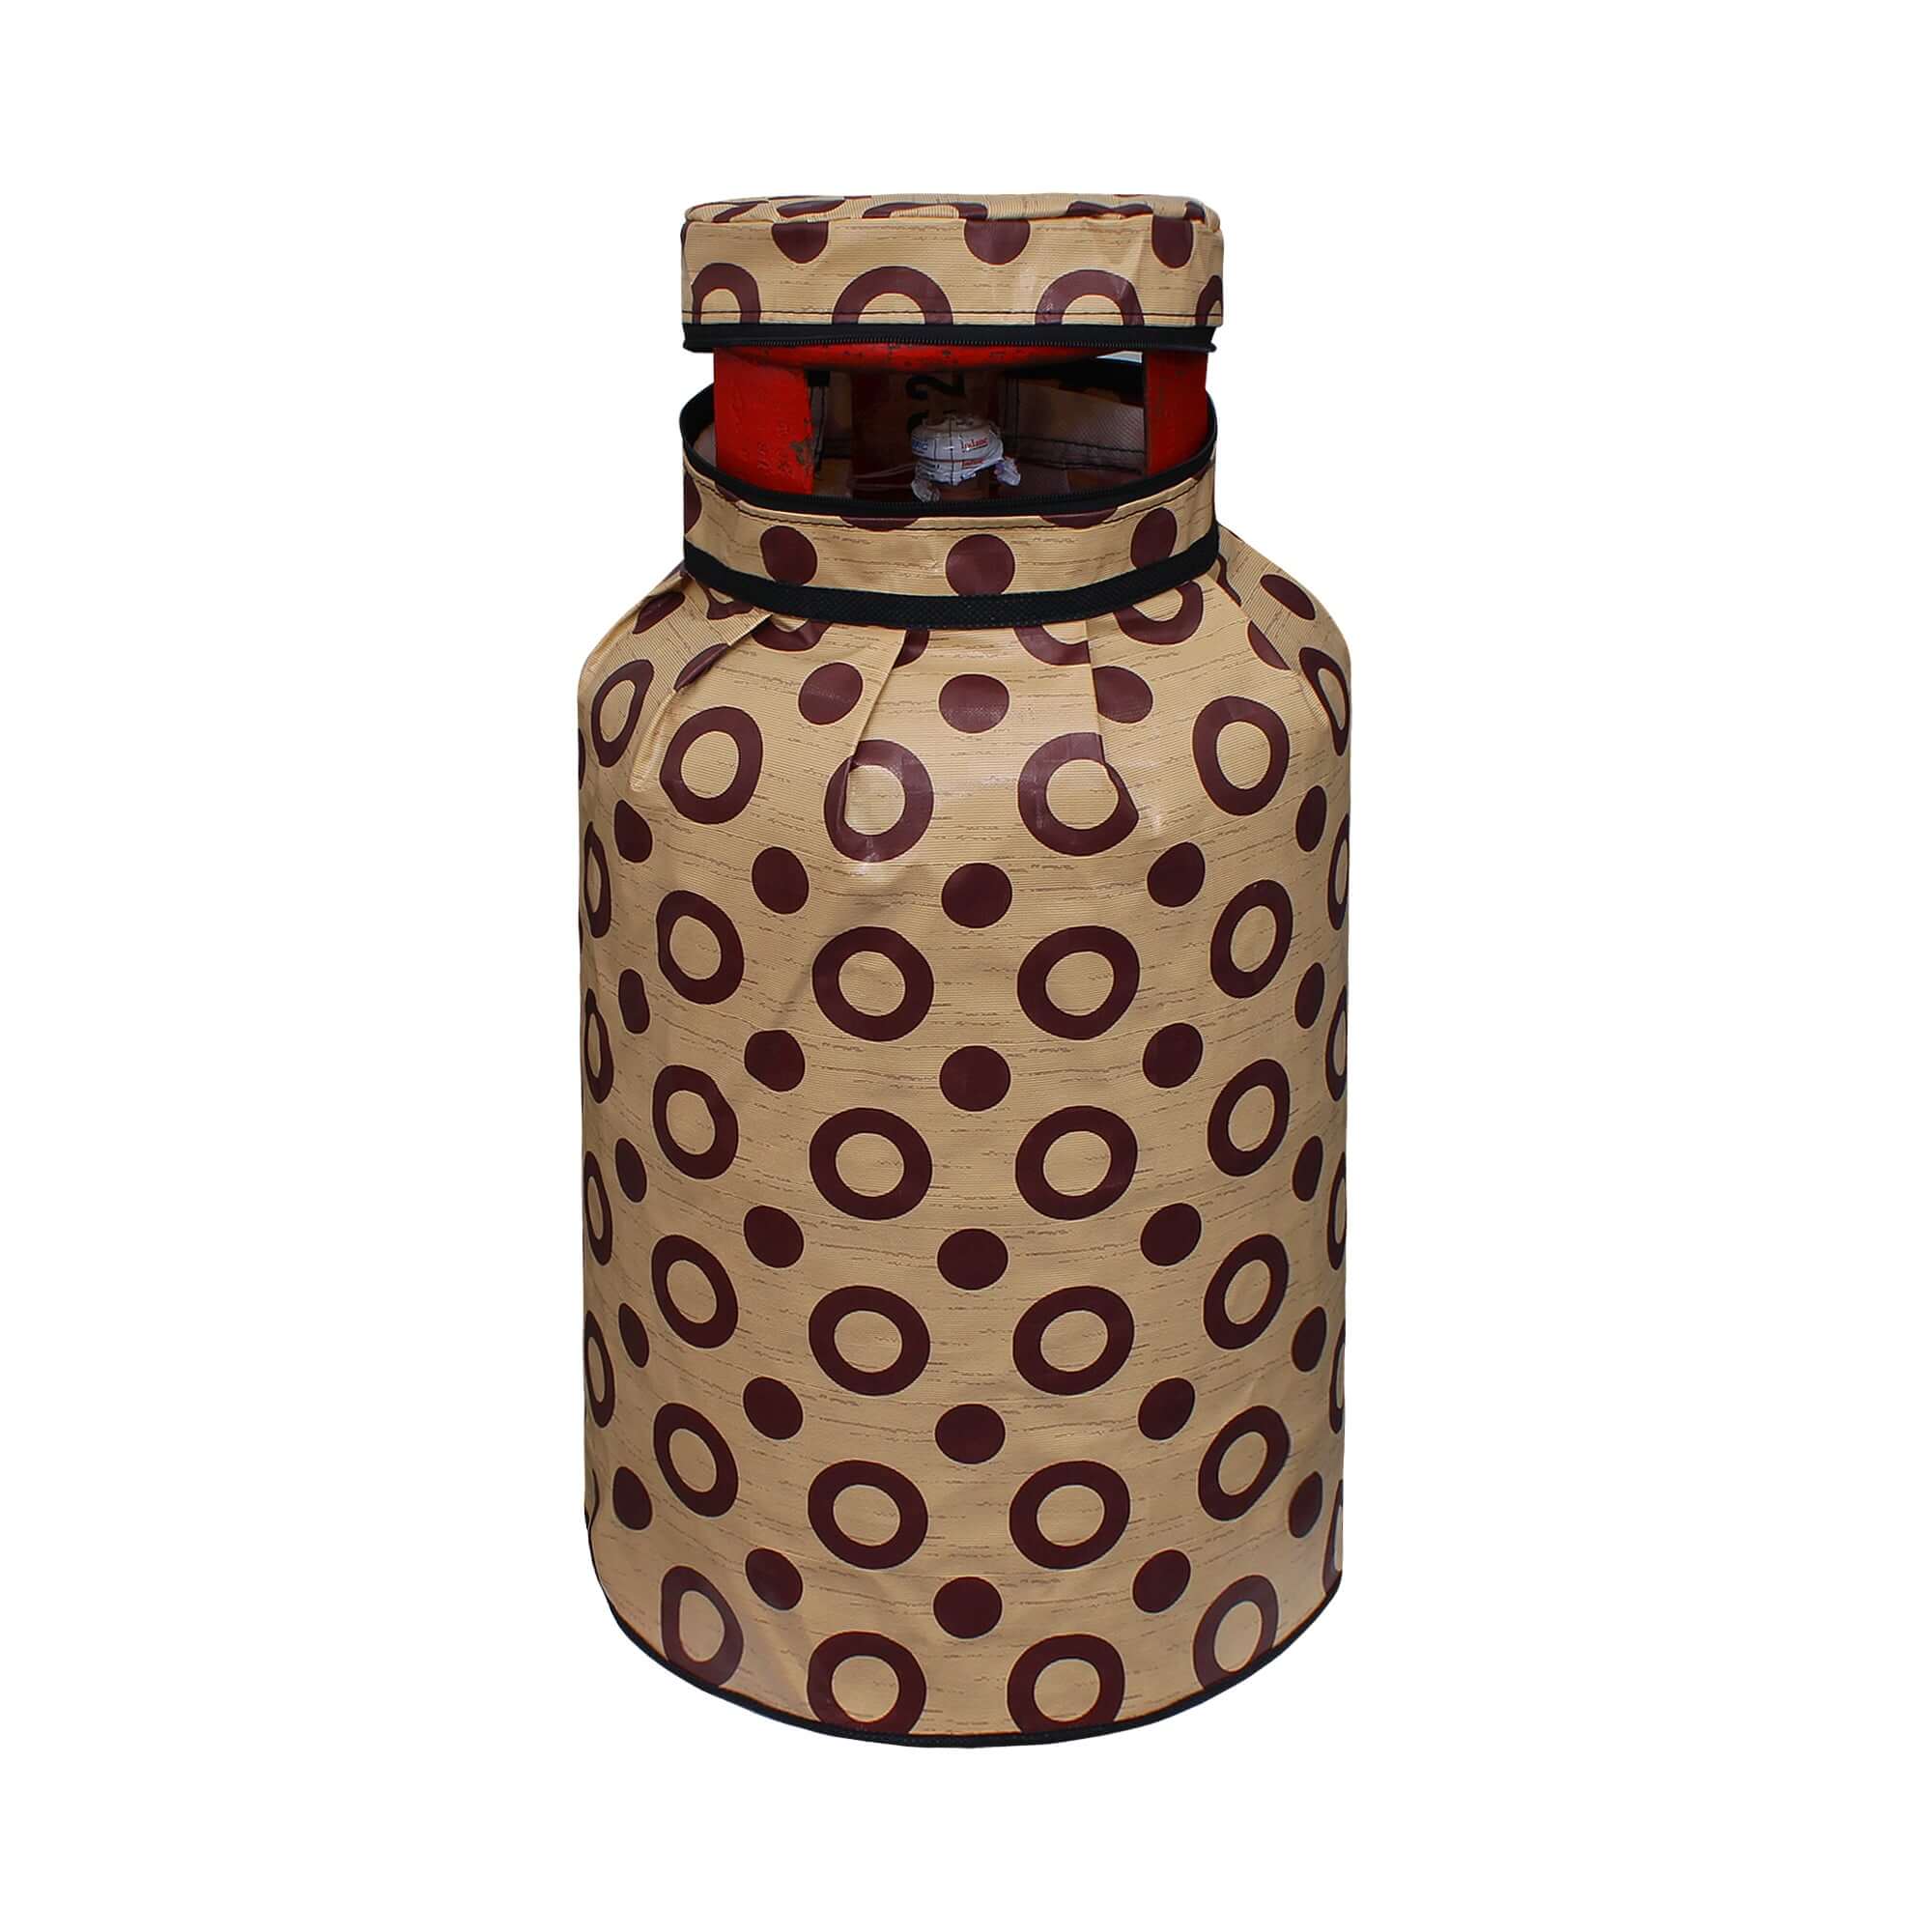 LPG Gas Cylinder Cover, SA02 - Dream Care Furnishings Private Limited